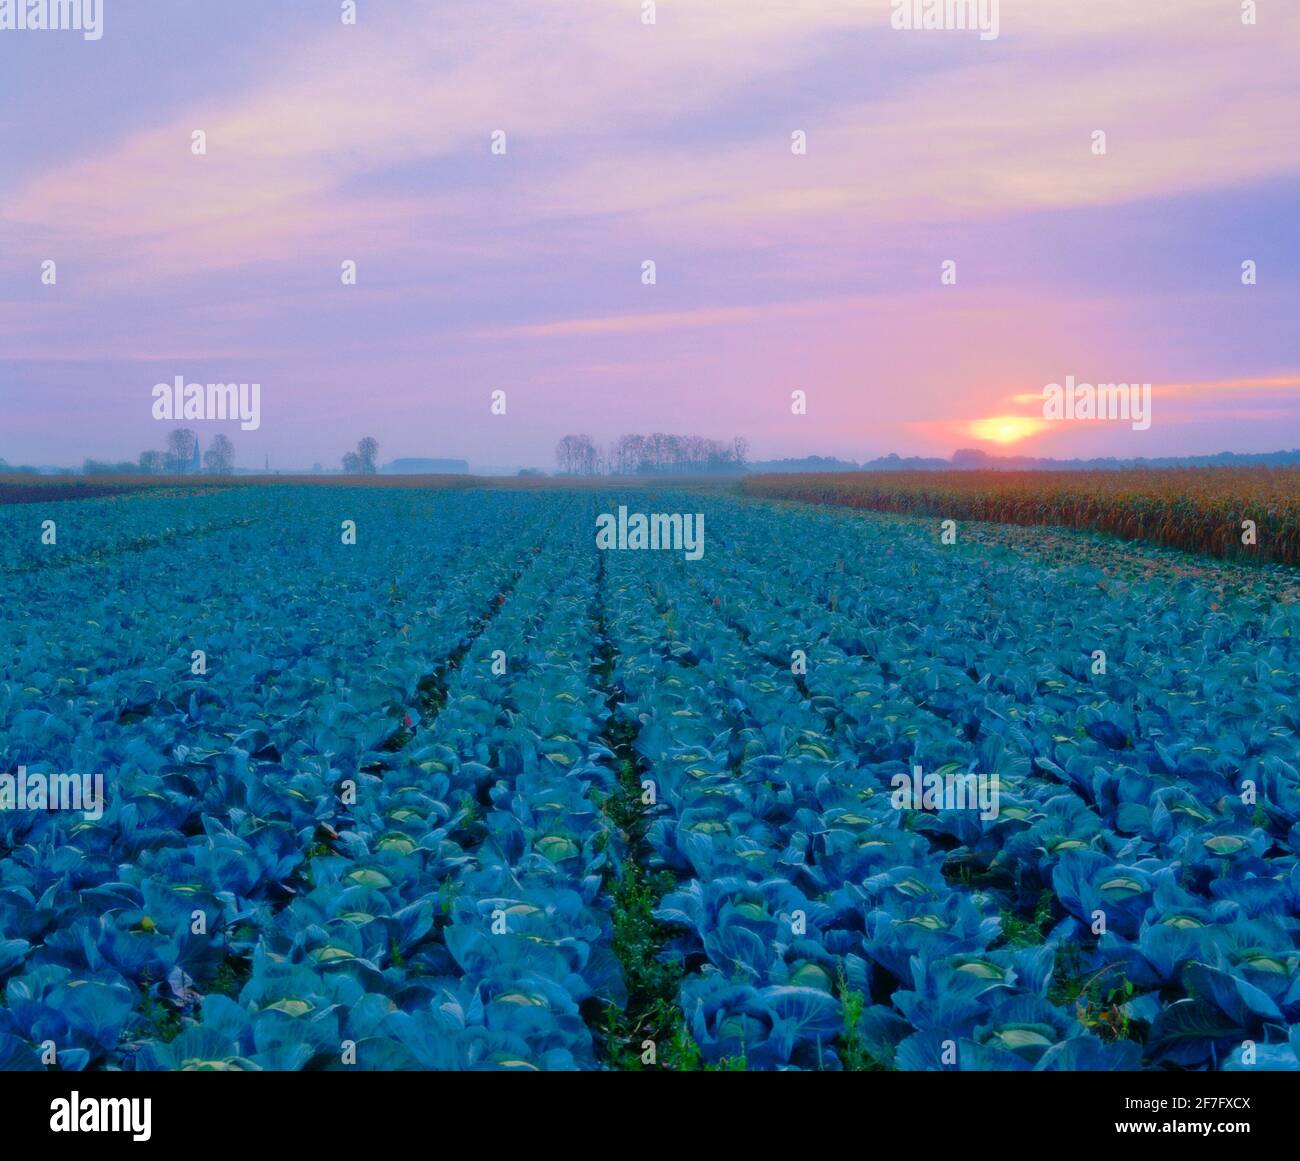 Cabbage field in agricultural landscape, dawn, Stock Photo